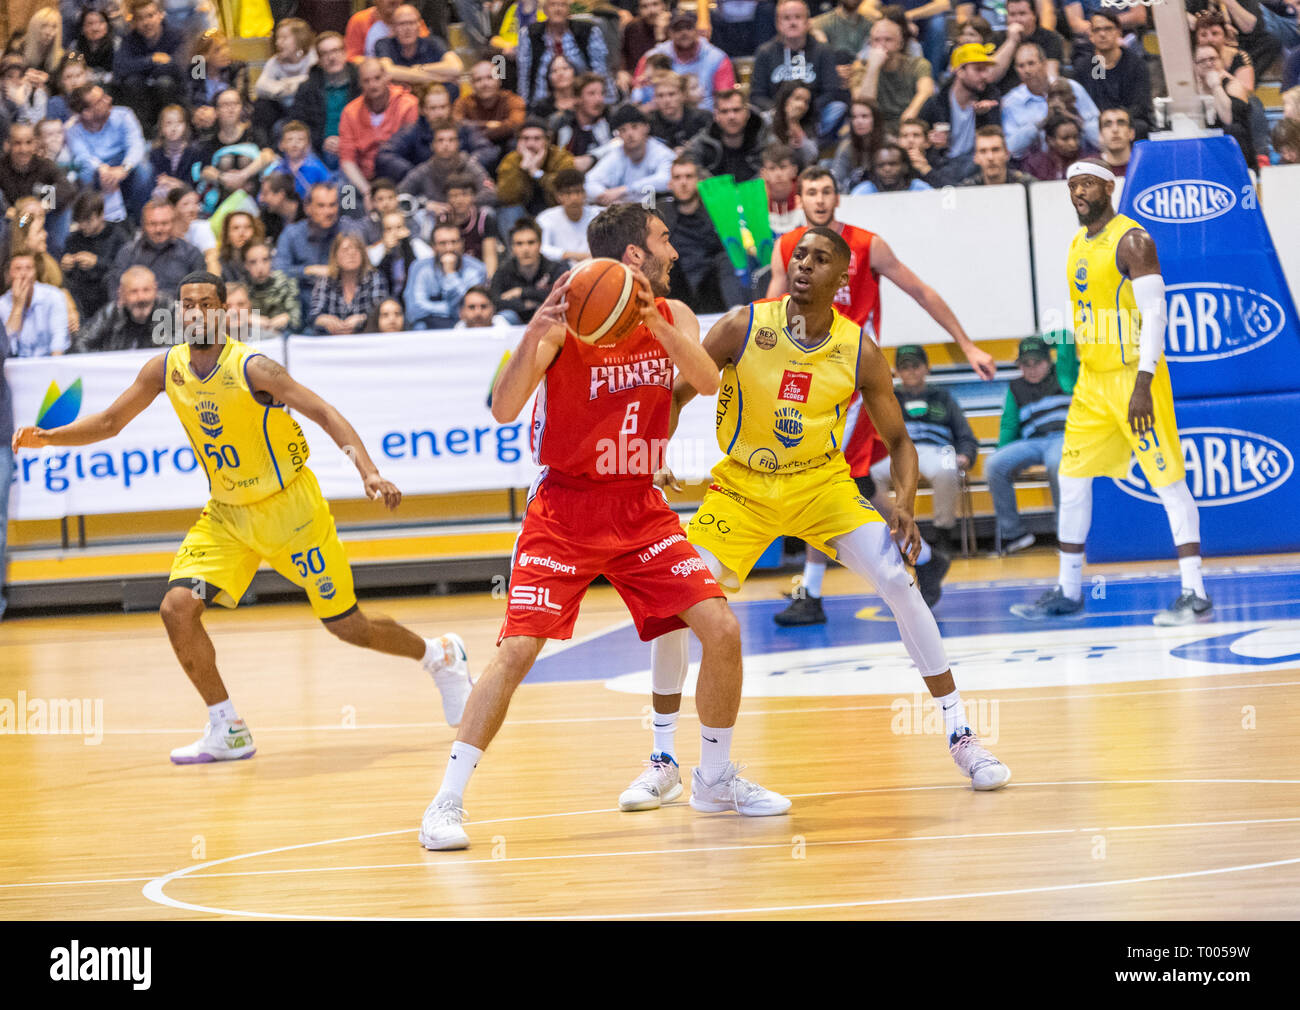 Vevey, Switzerland. 16th march, 2019. LNAM SB League Rivera Lakers VS Pully Lausanne Foxes-Rivera Lakers VS Pully Lausanne Foxes- Rivera Lakers VS Pully Lausanne Foxes at Rivage Galeries, Vevey (Swiss Basket), 16-03-2019. Credit: Eric Dubost/Alamy Live News Stock Photo